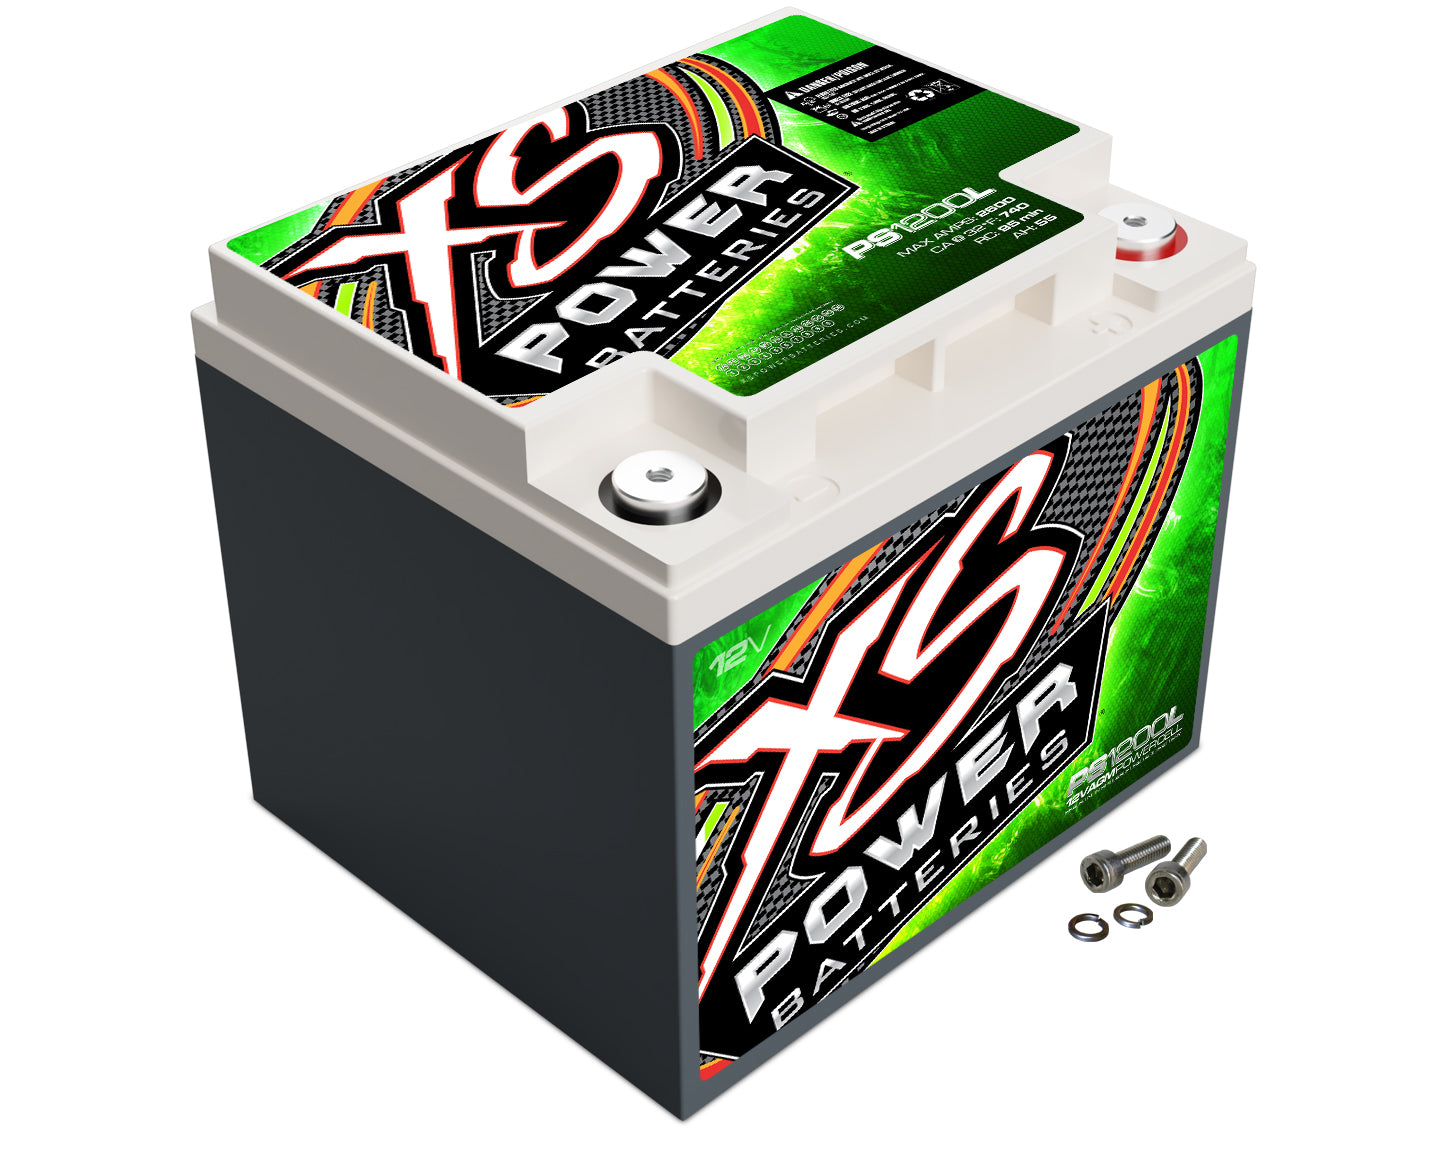 PS1200L XS Power 12VDC AGM Powersports Battery 2600A 55Ah